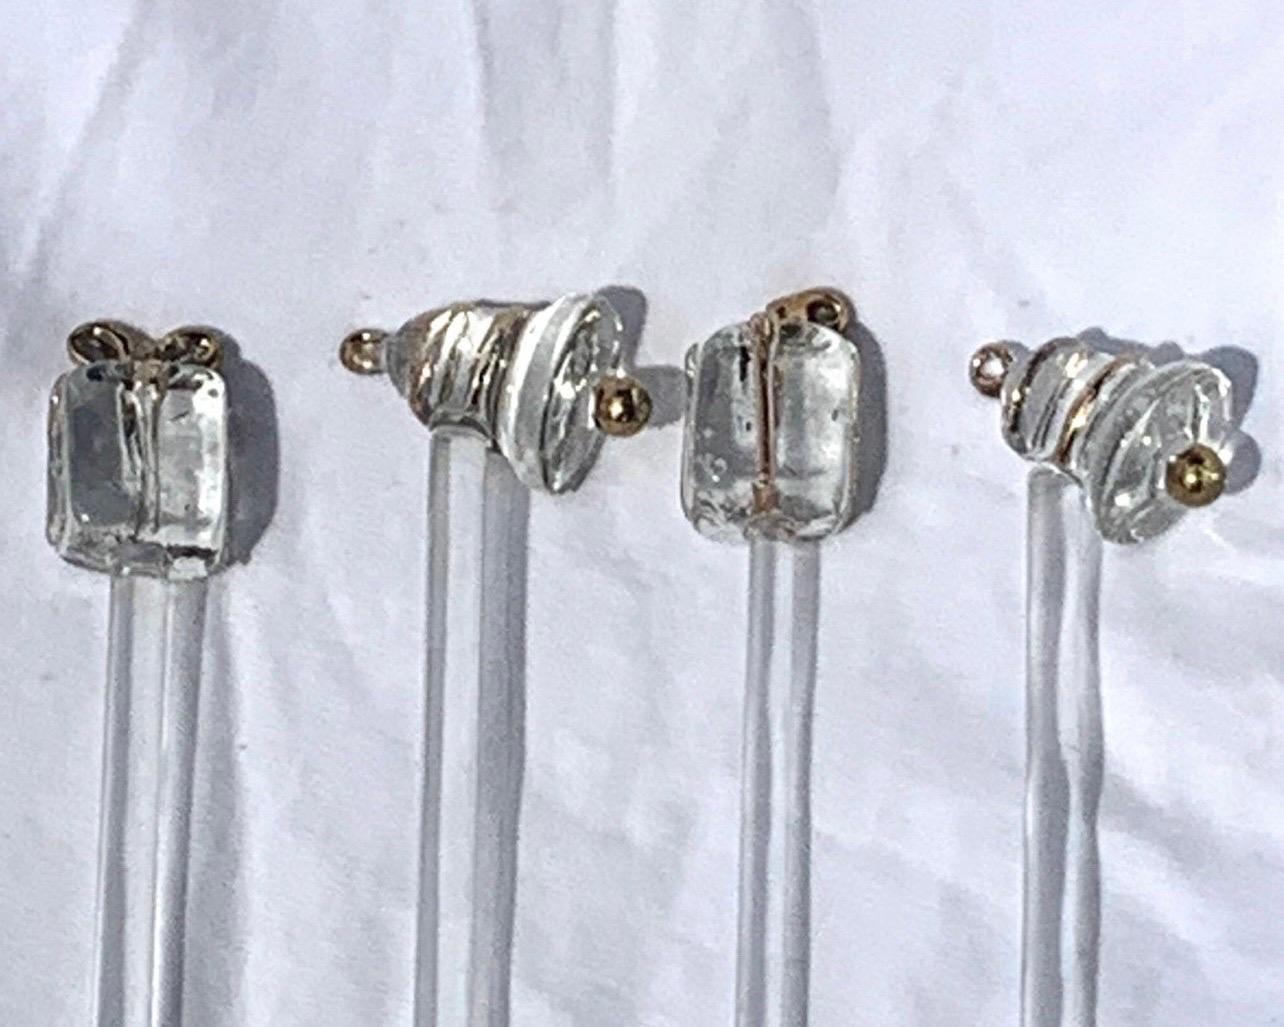 A set of 4 clear art glass swizzle sticks.  2 with presents on the end and 2 with bells.   No chips or cracks.  Fantastic for your holiday bar!  